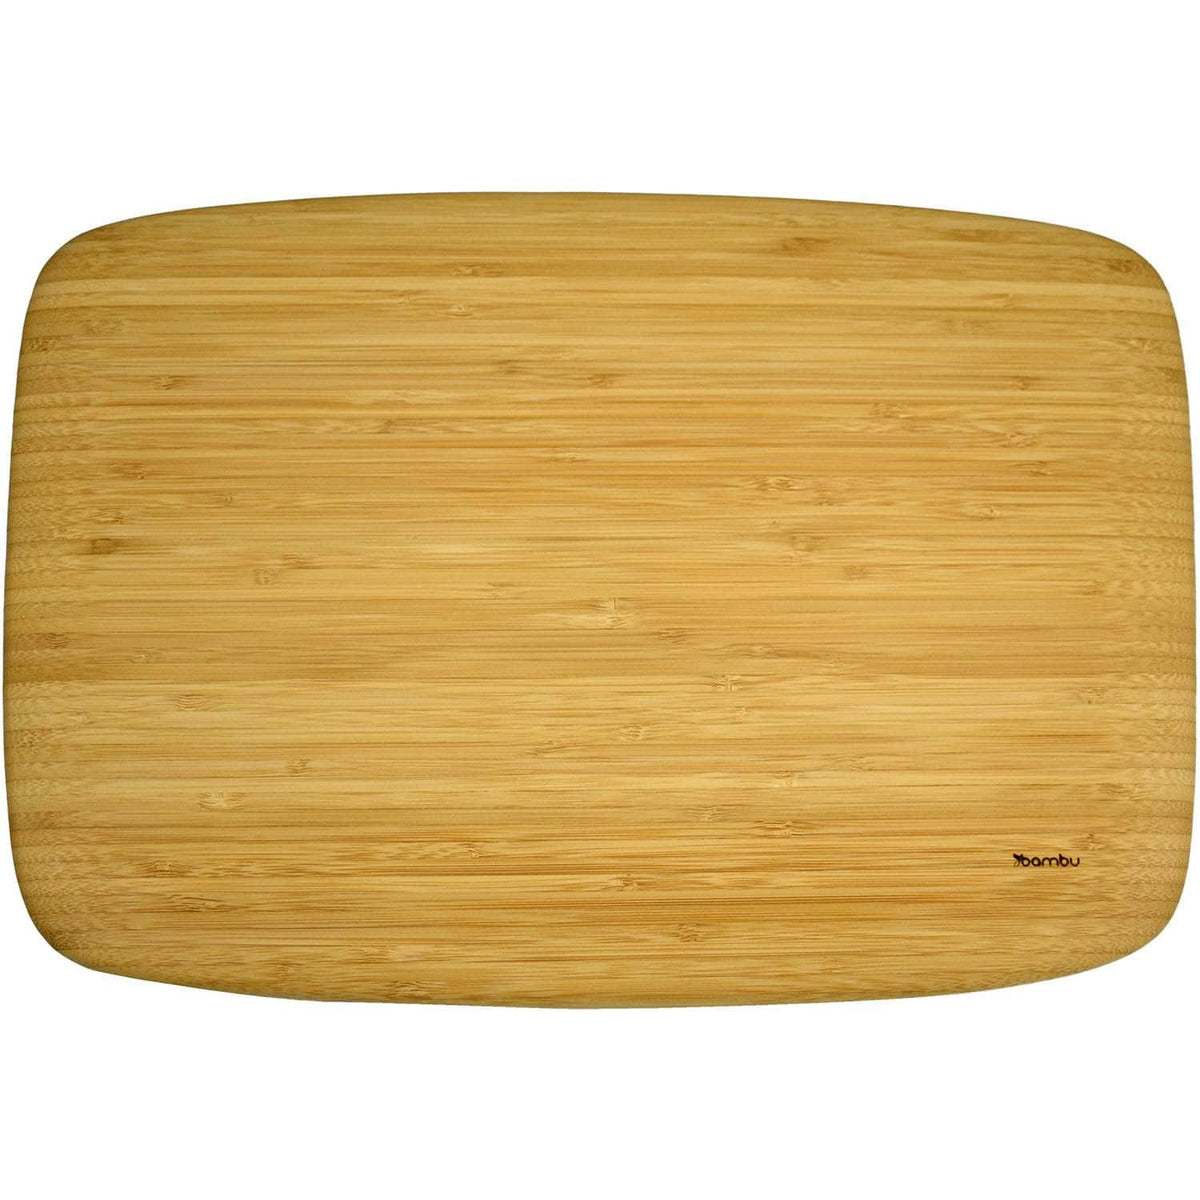 *NEW* Classic bamboo cutting &amp; serving boards Large